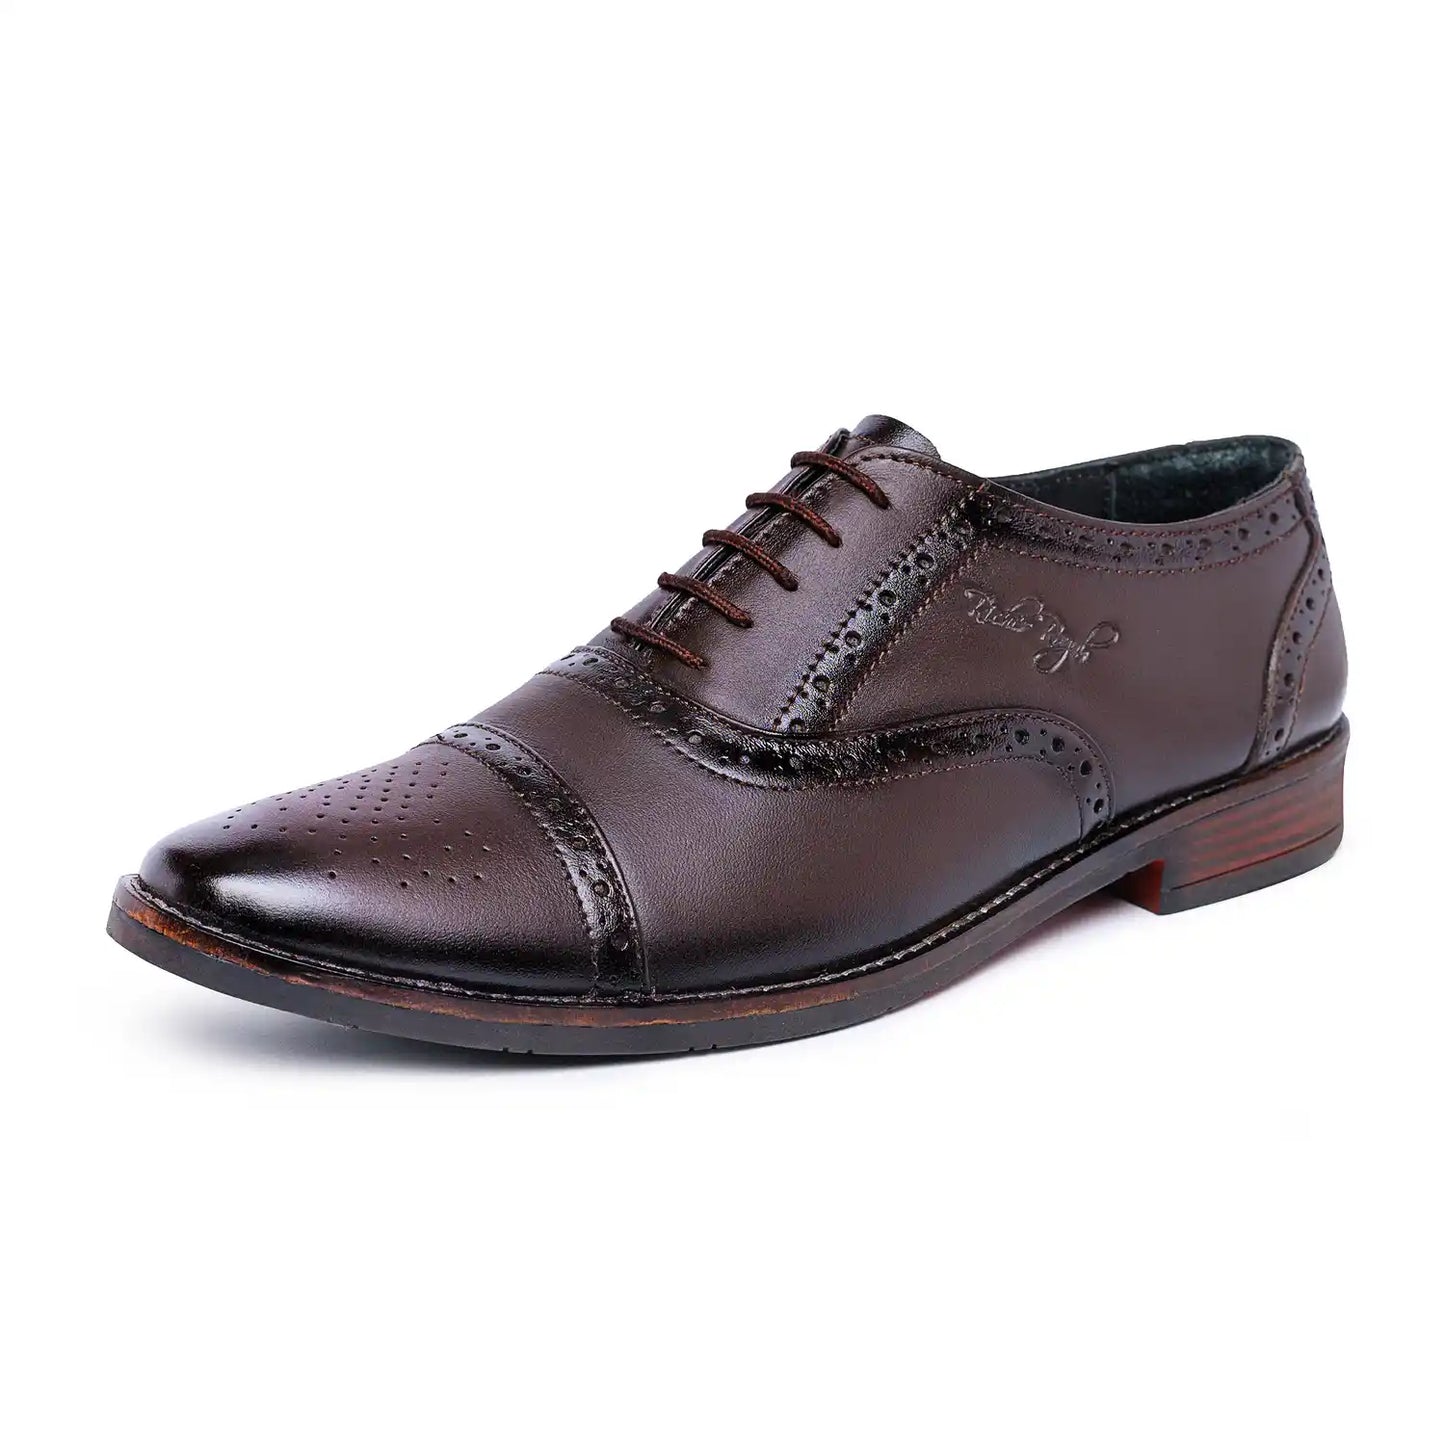 Genuine Leather Oxford Brogue Lace Up Shoes